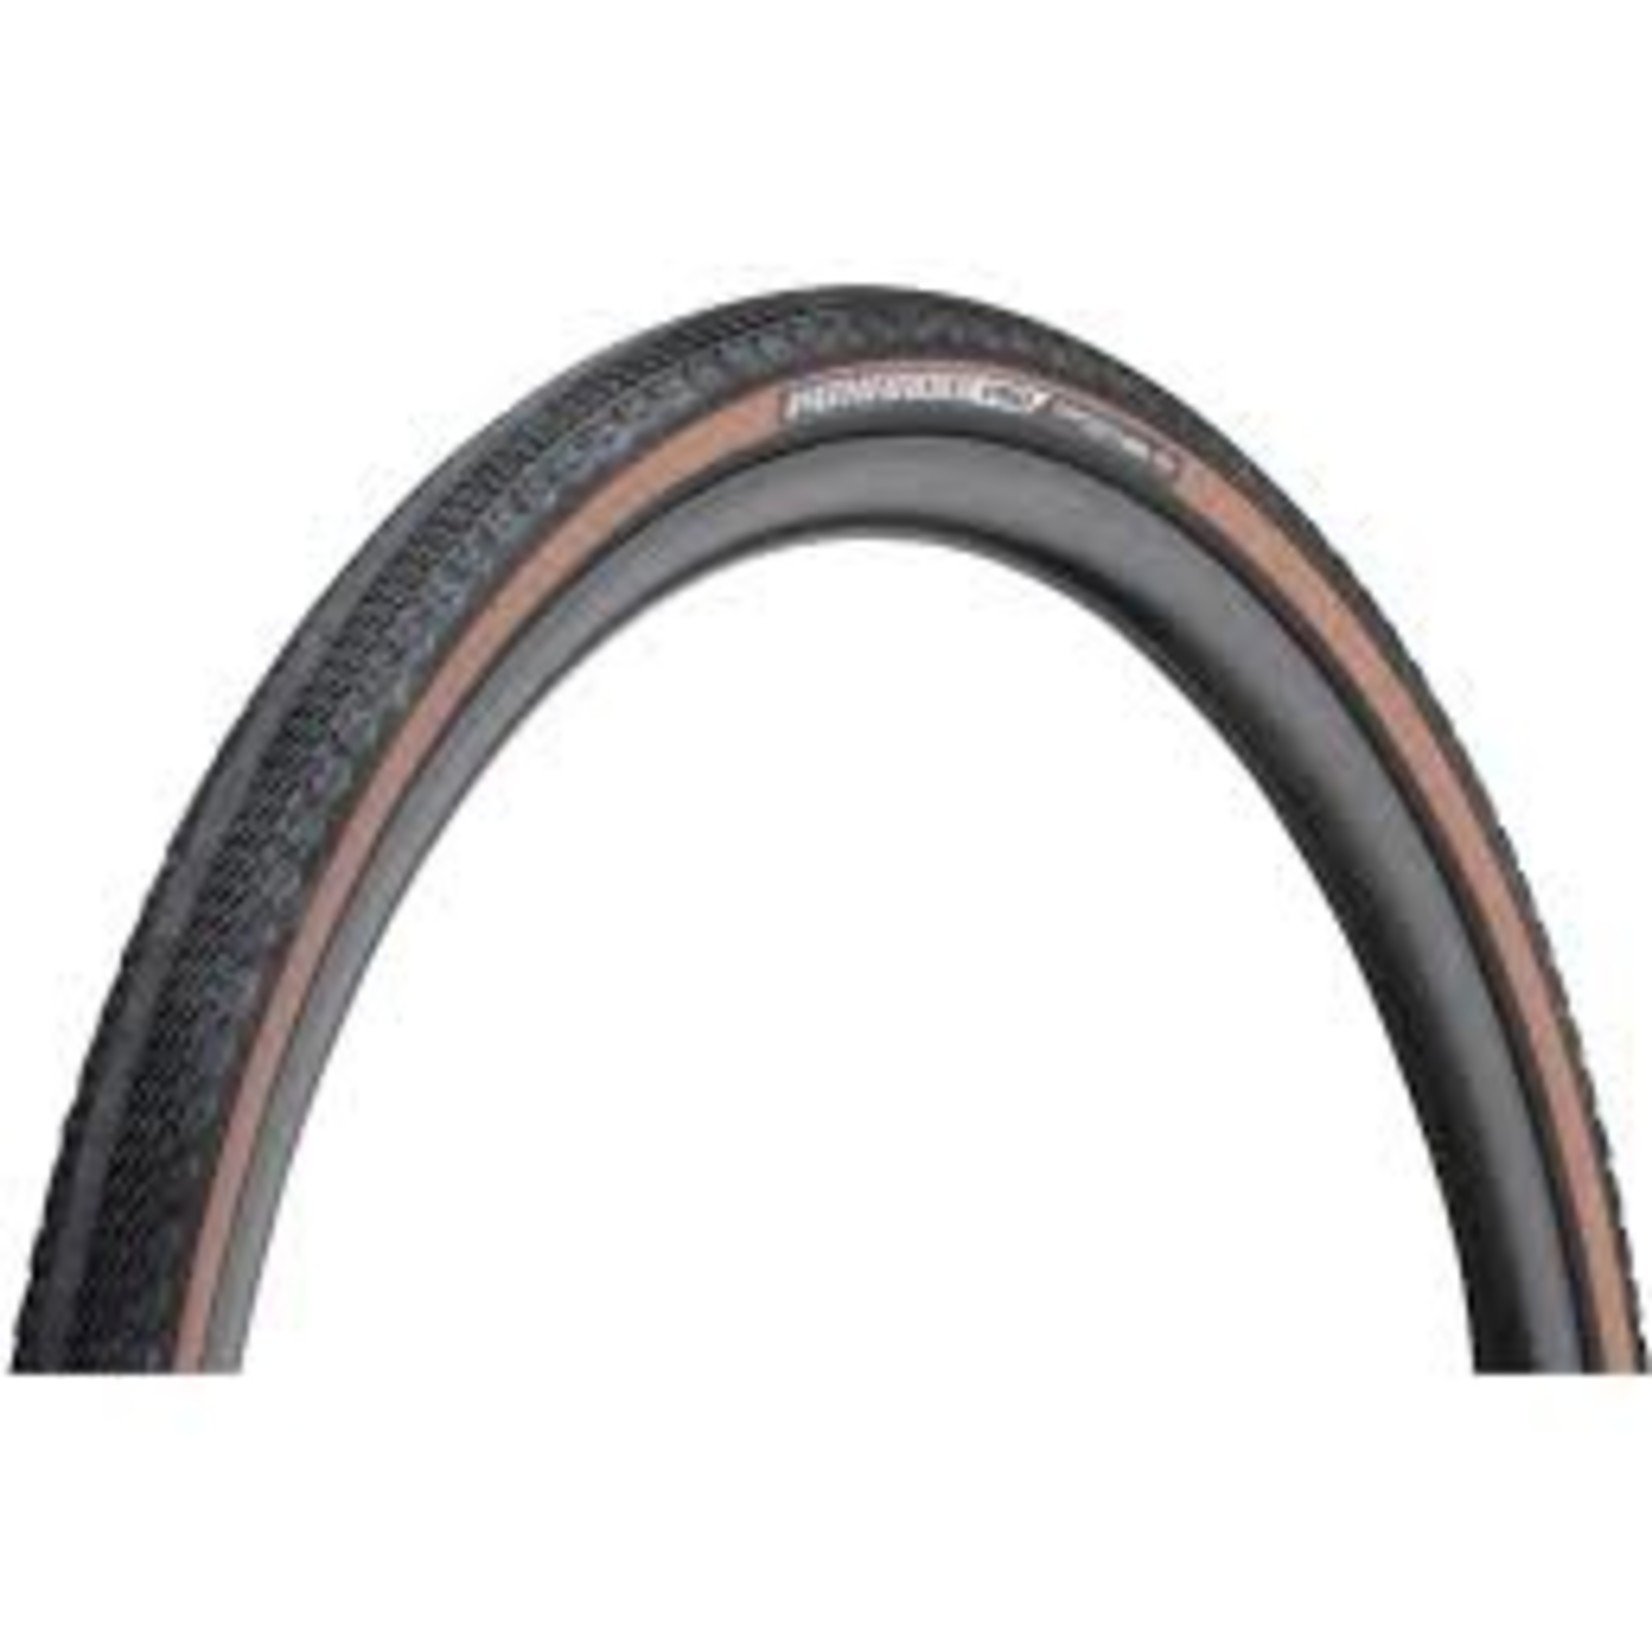 Specialized Pathfinder Pro Tubeless Ready Tire 700 x 38c Tan Wall